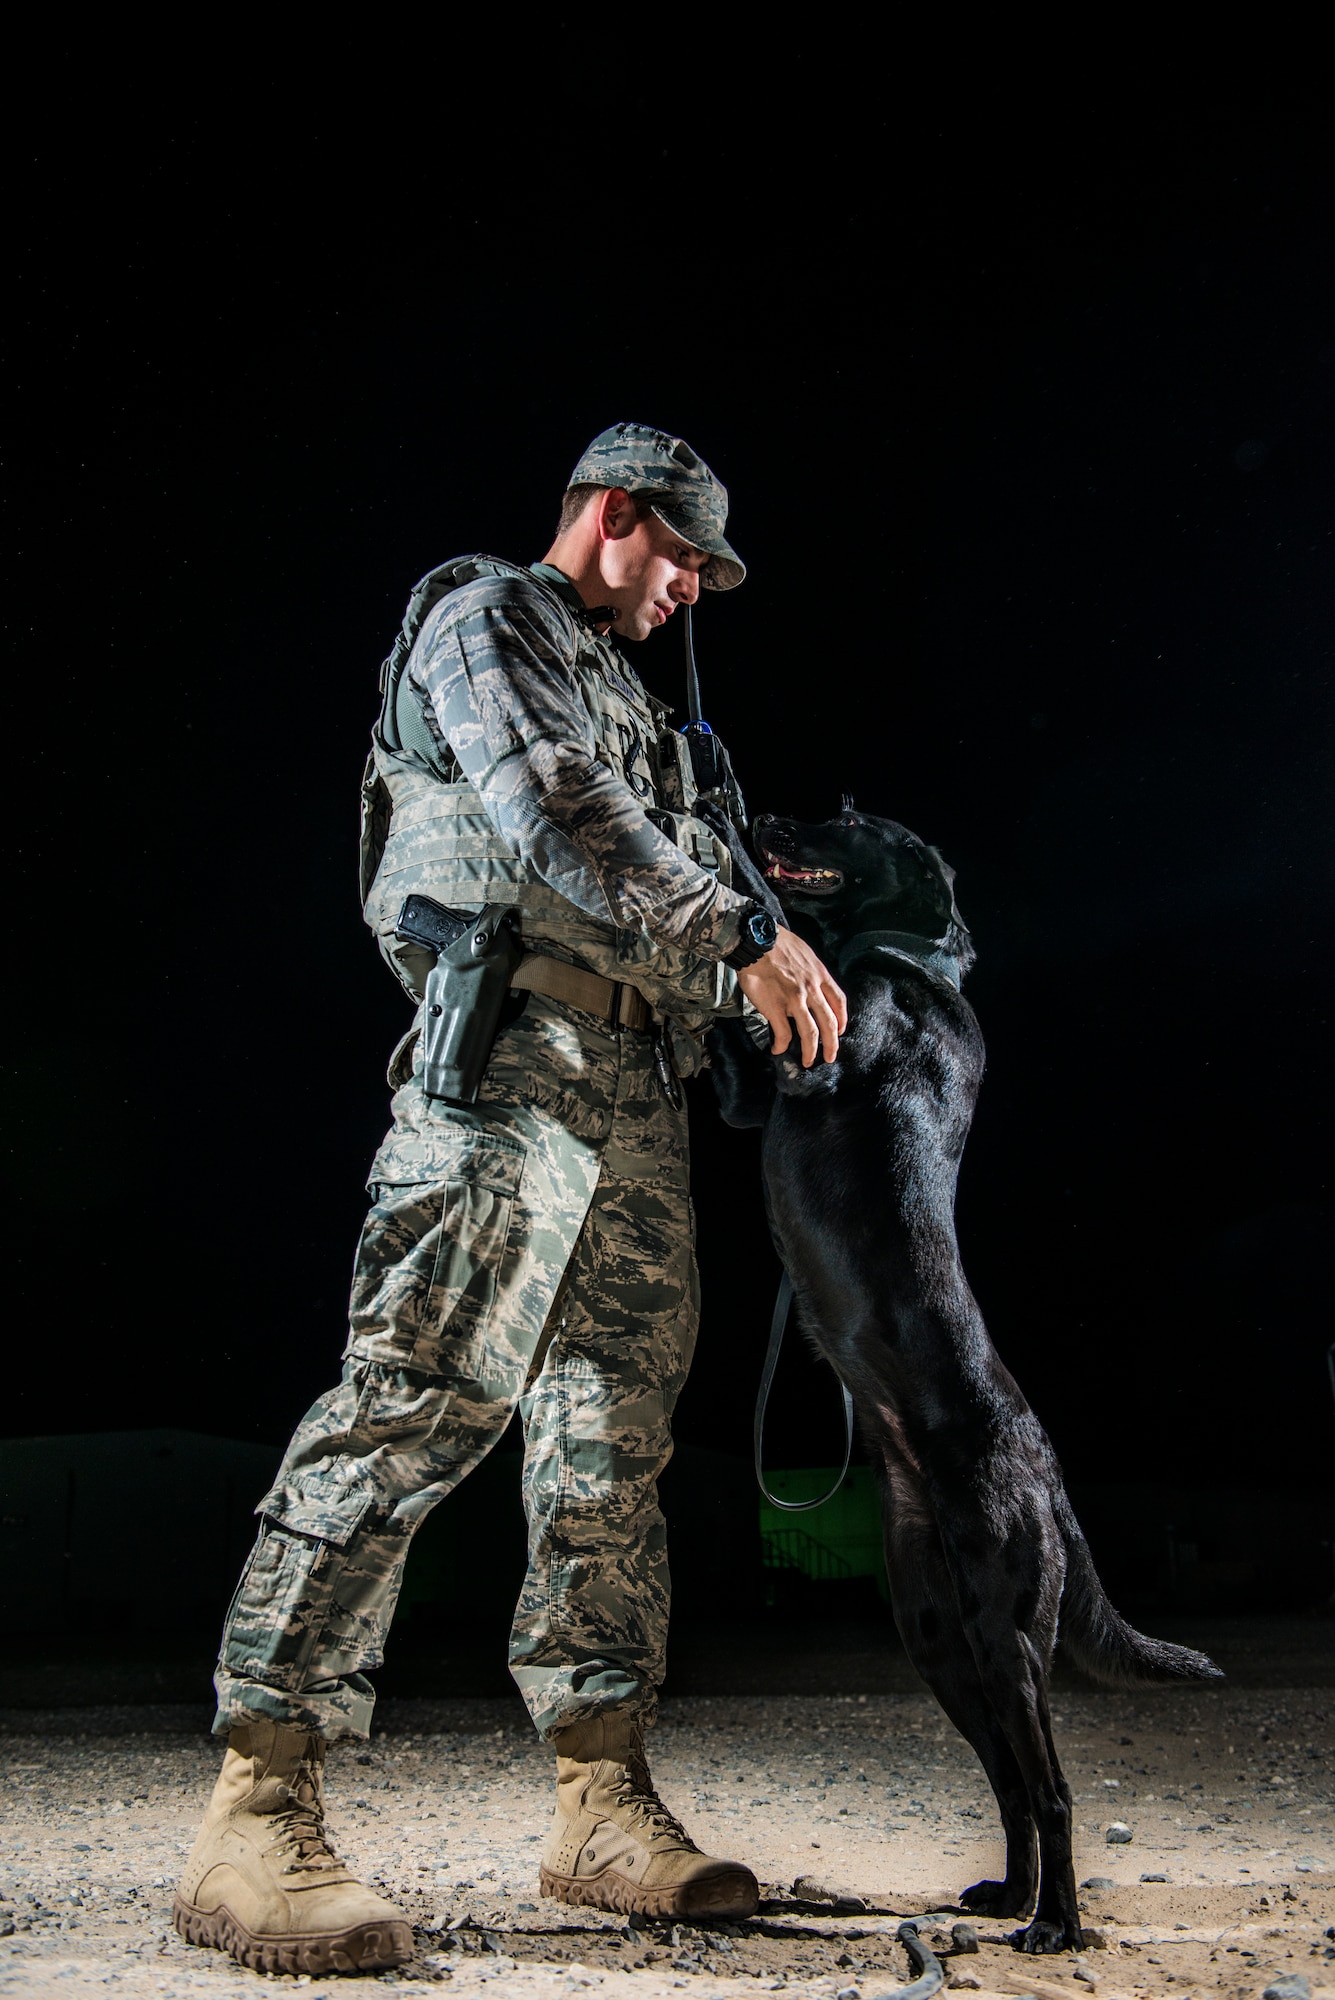 U.S Air Force Staff Sgt. Jesse Galvan, 386th Expeditionary Security Forces Squadron military working dog handler, poses with his dog, Ritz, July 16, 2014 at an undisclosed location in Southwest Asia. Galvan has been partnered with Ritz for two and a half years and deployed twice with her. The Dallas-Ft. Worth native deployed here from Tinker Air Force Base, Oklahoma in support of Operation Enduring Freedom. (U.S. Air Force photo by Staff Sgt. Jeremy Bowcock)